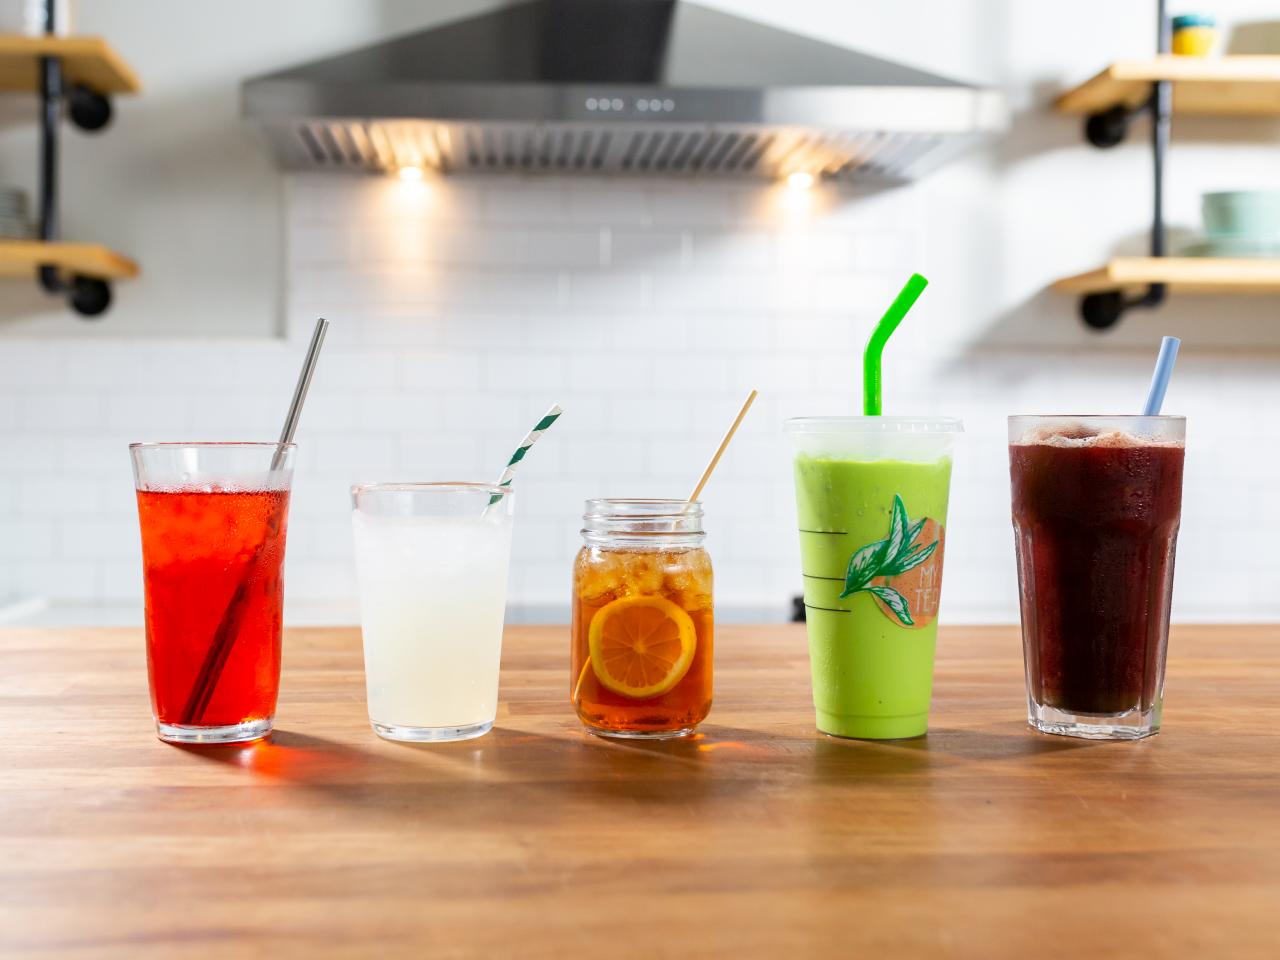 11 Best Reusable Straws in 2023 Reviewed